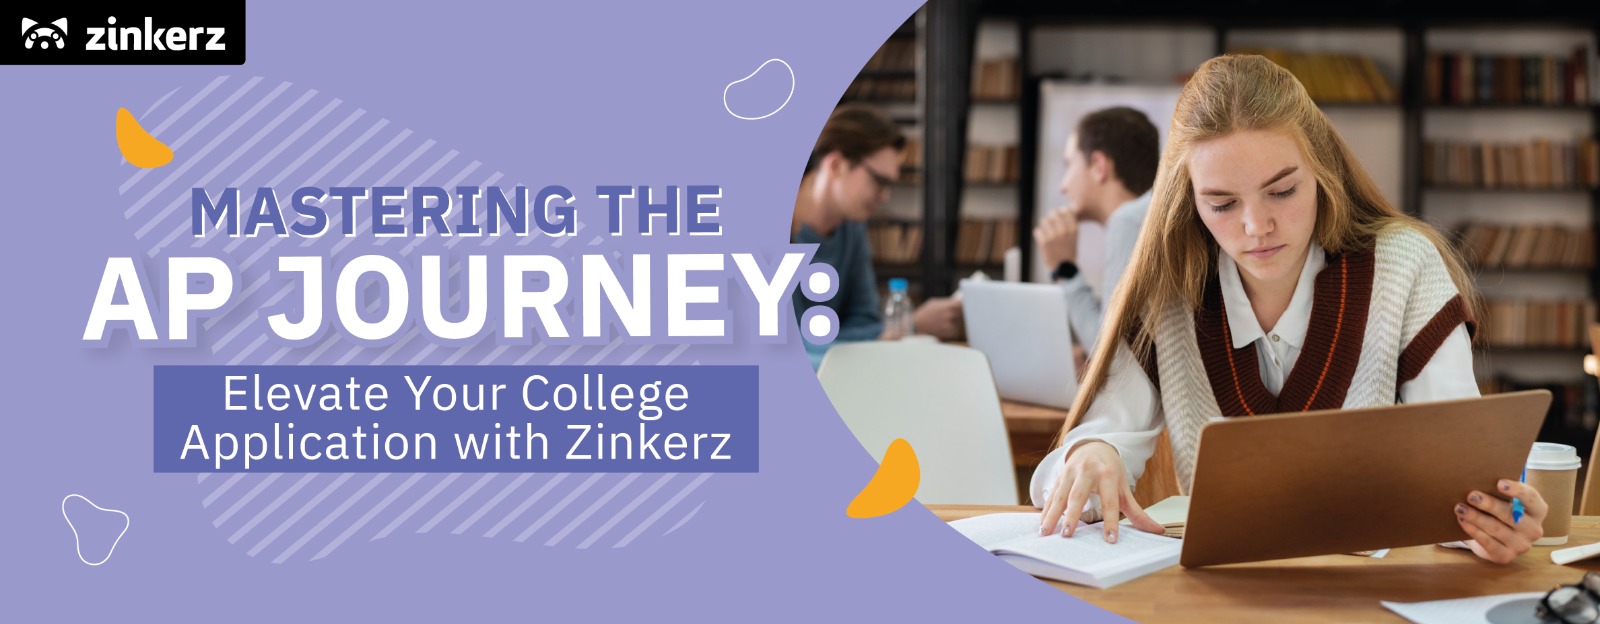 Mastering the AP Journey: Elevate Your College Application with Zinkerz